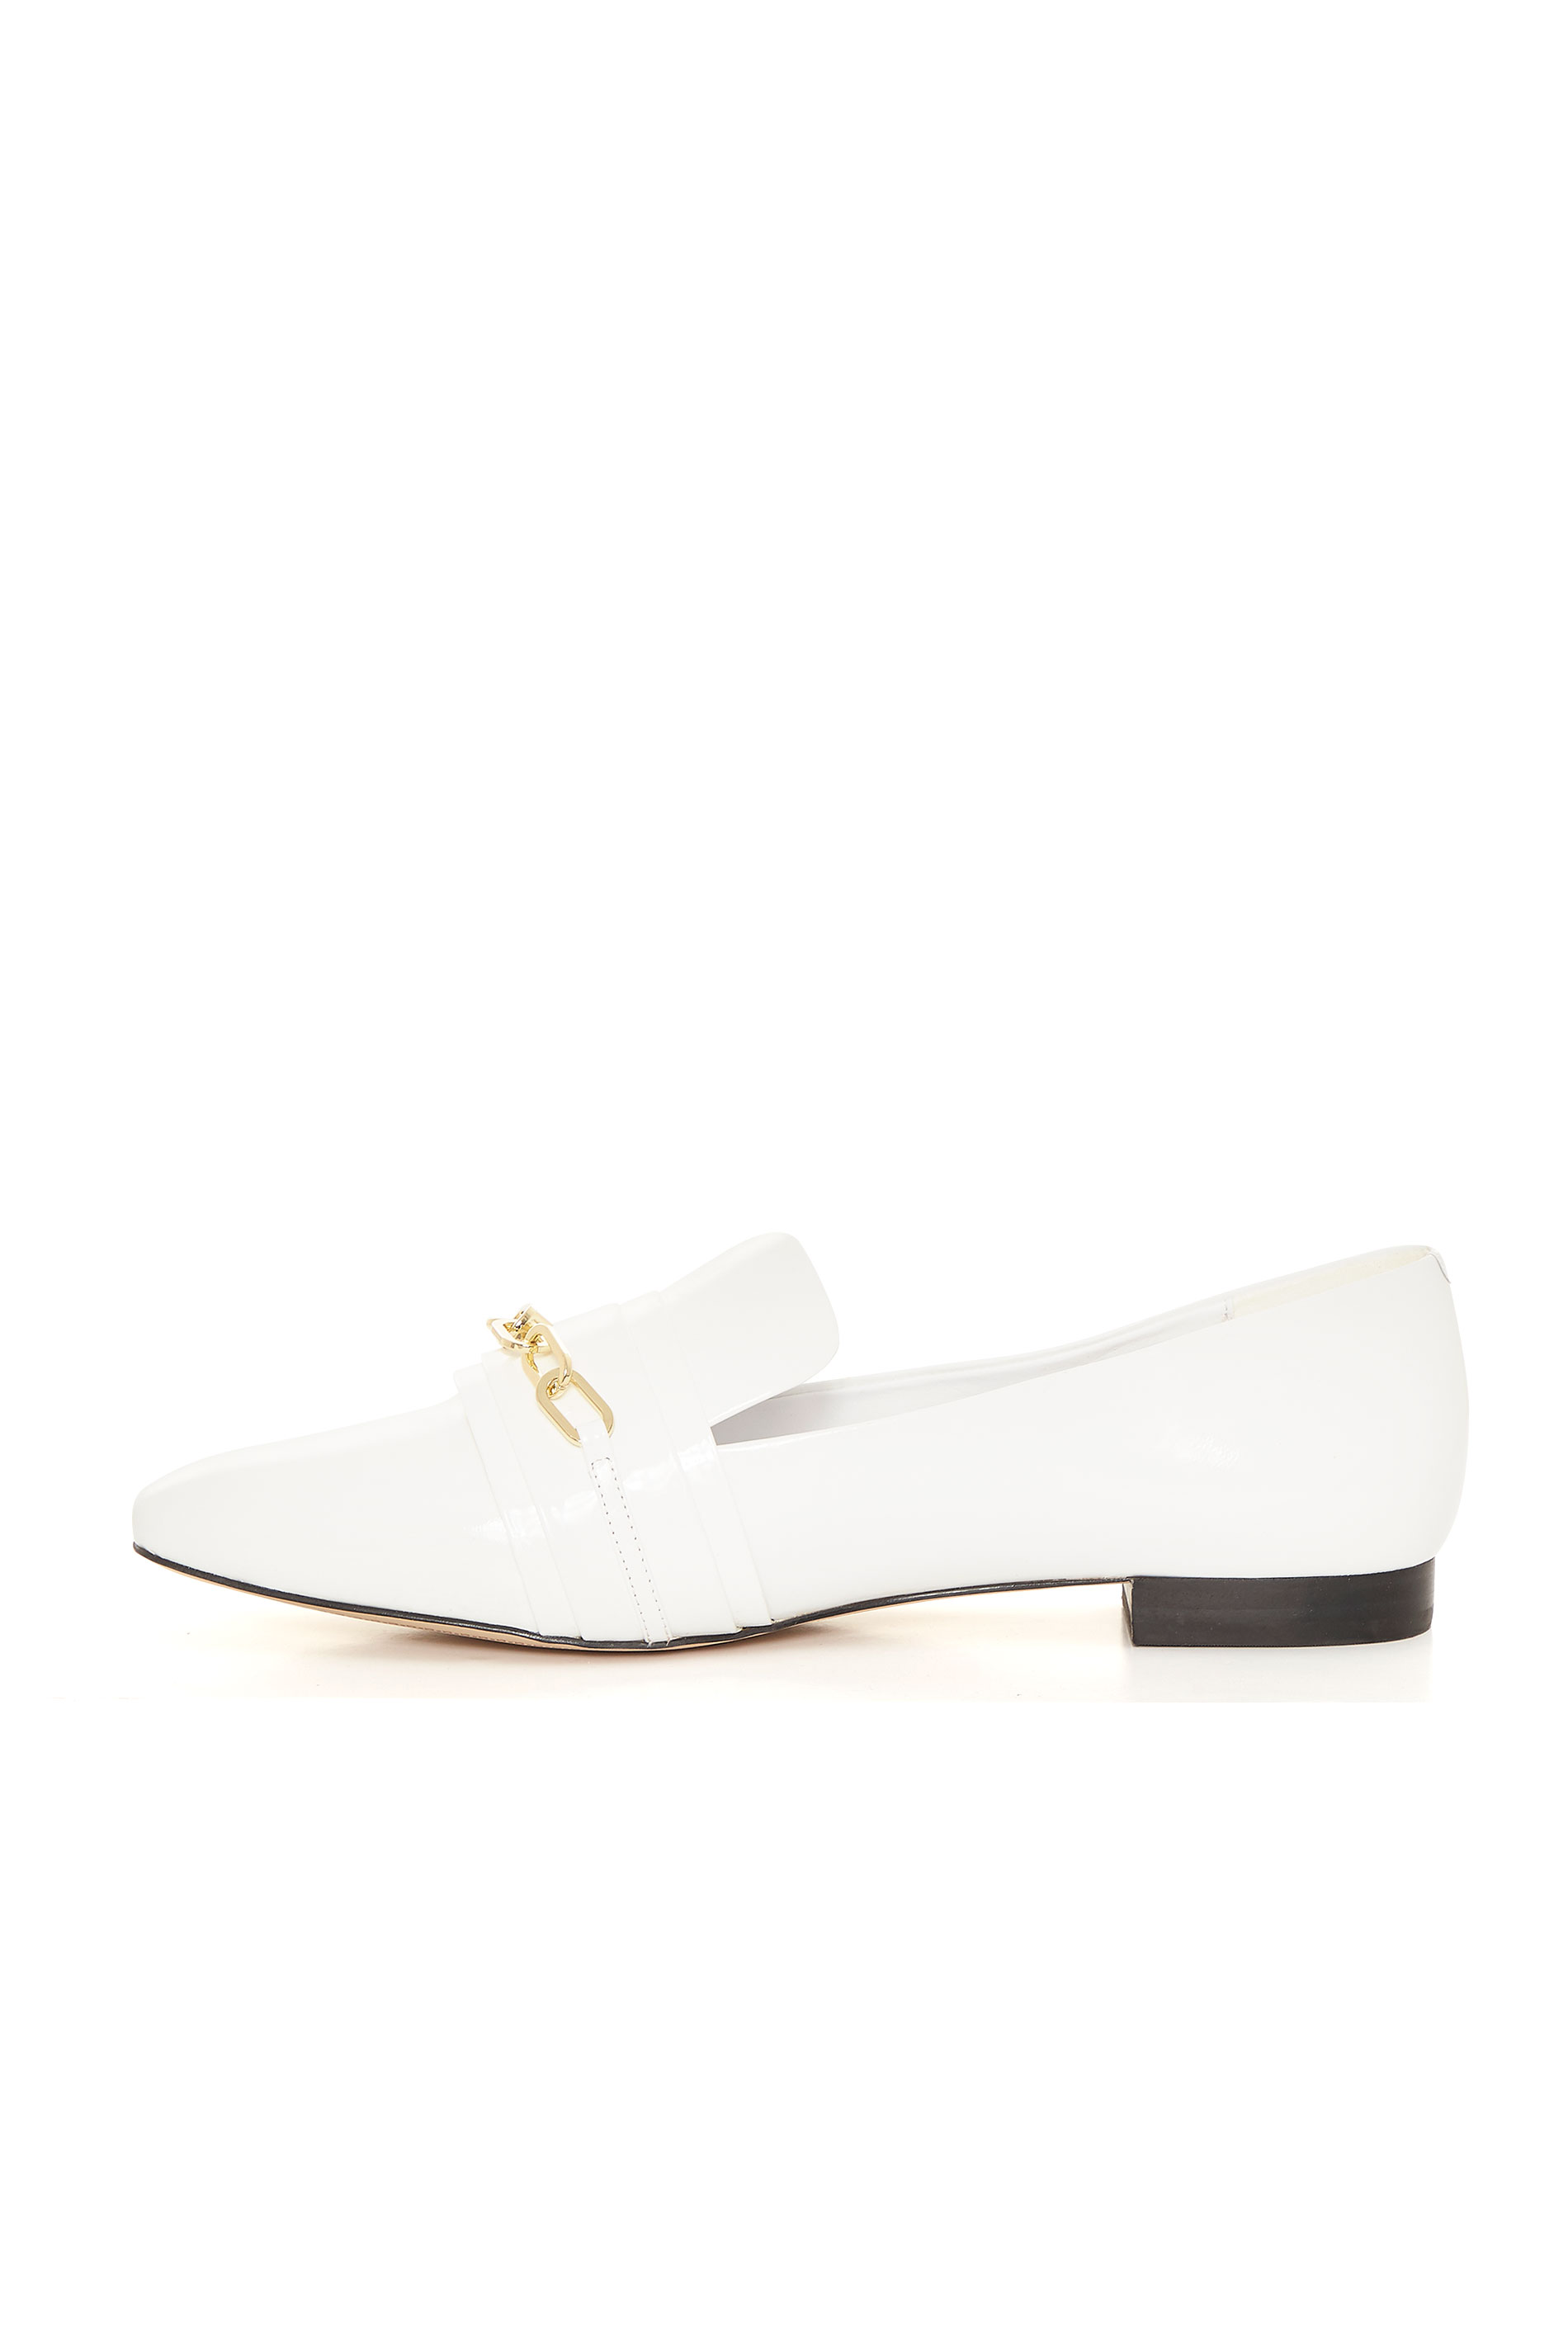 KARL LAGERFELD PARIS White Patent Leather Loafers | Long Tall Sally